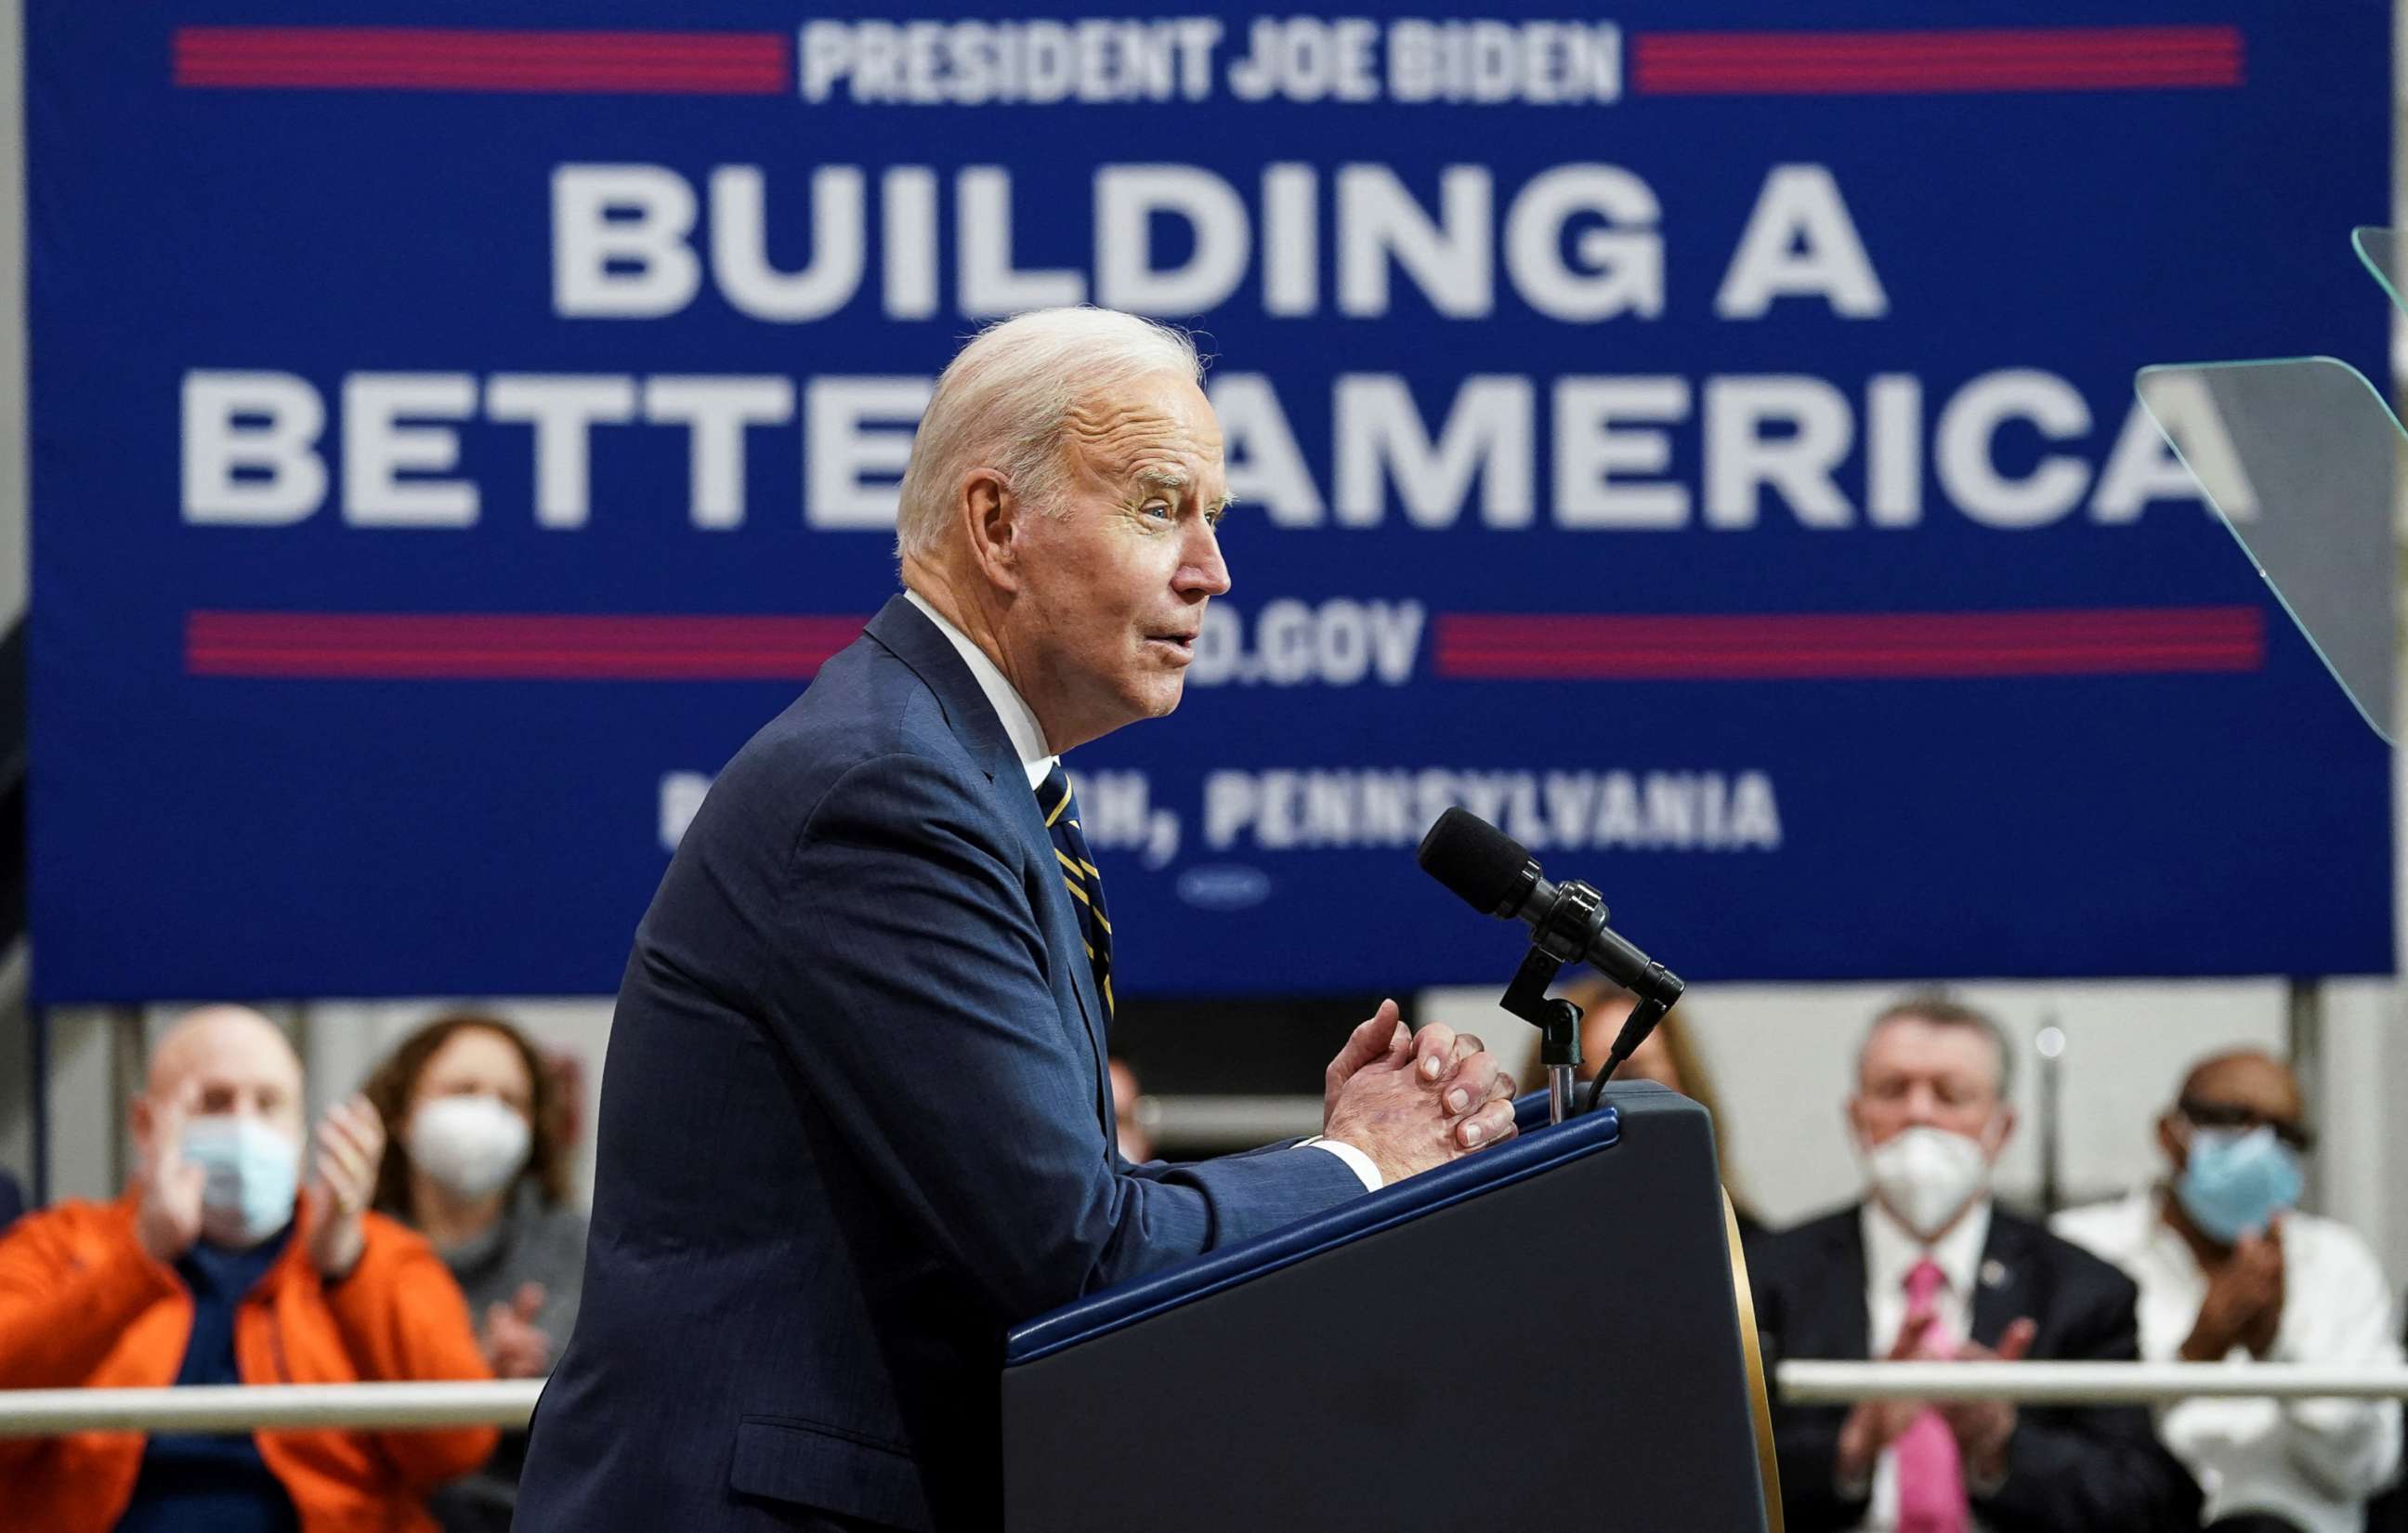 PHOTO: President Biden delivers remarks to tout the $1.2 trillion "Infrastructure Investment and Jobs Act," during a visit to Carnegie Mellon University at Mill 19 in Pittsburgh, Penn., Jan. 28, 2022.